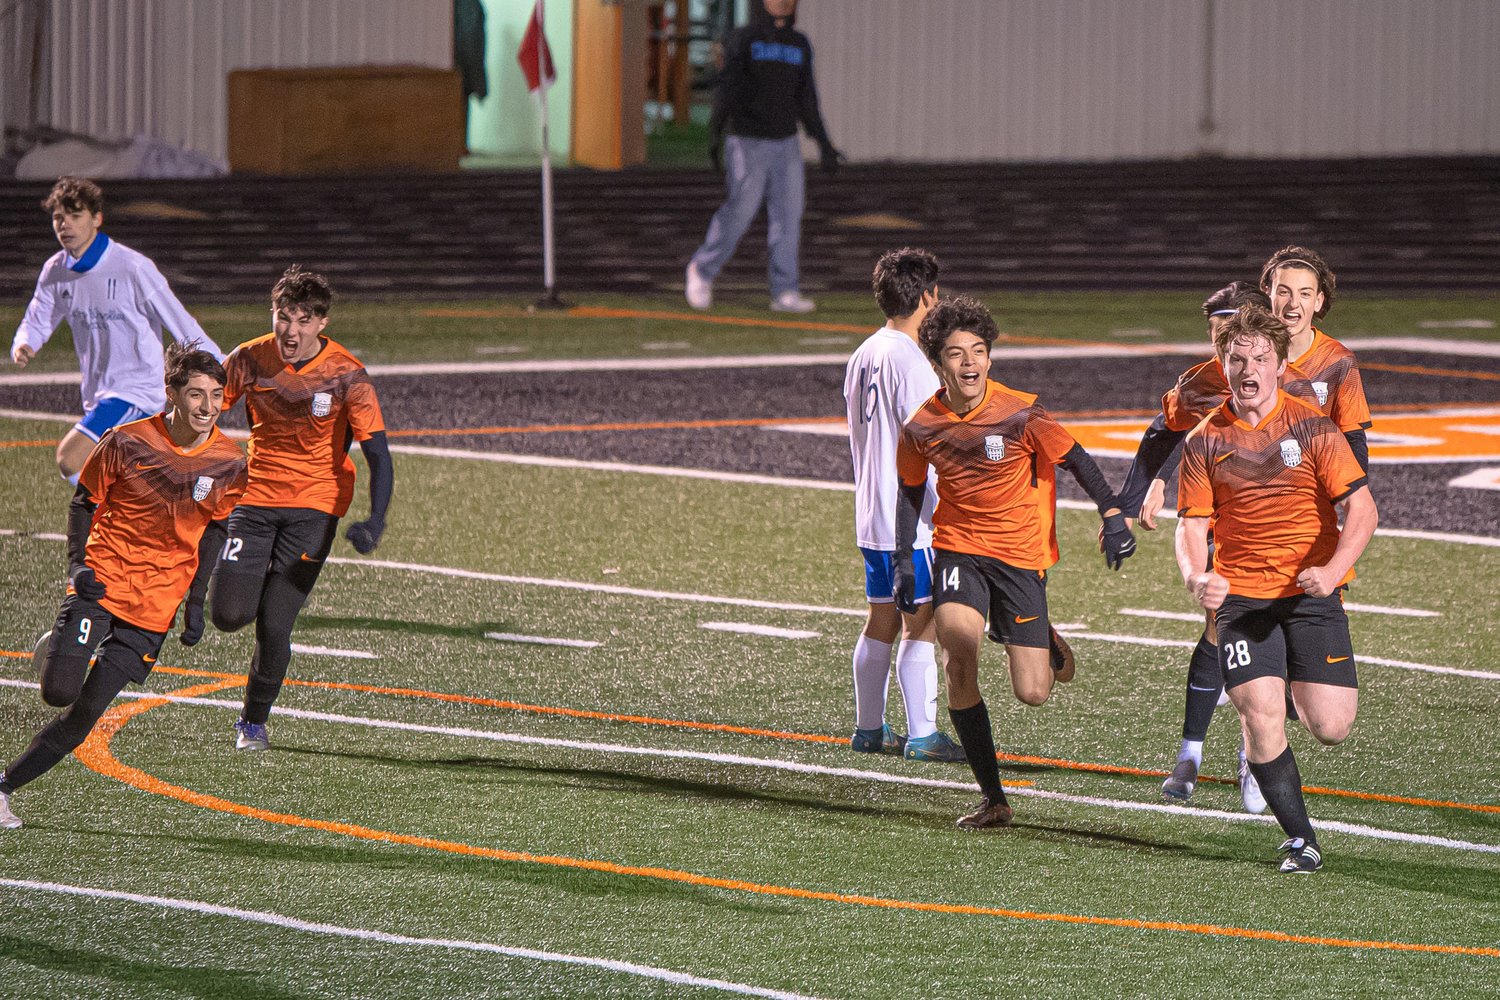 Blaine boys soccer players celebrate a late goal in the team’s 2-0 win over Sedro-Woolley High School March 24 at the Blaine High School stadium.